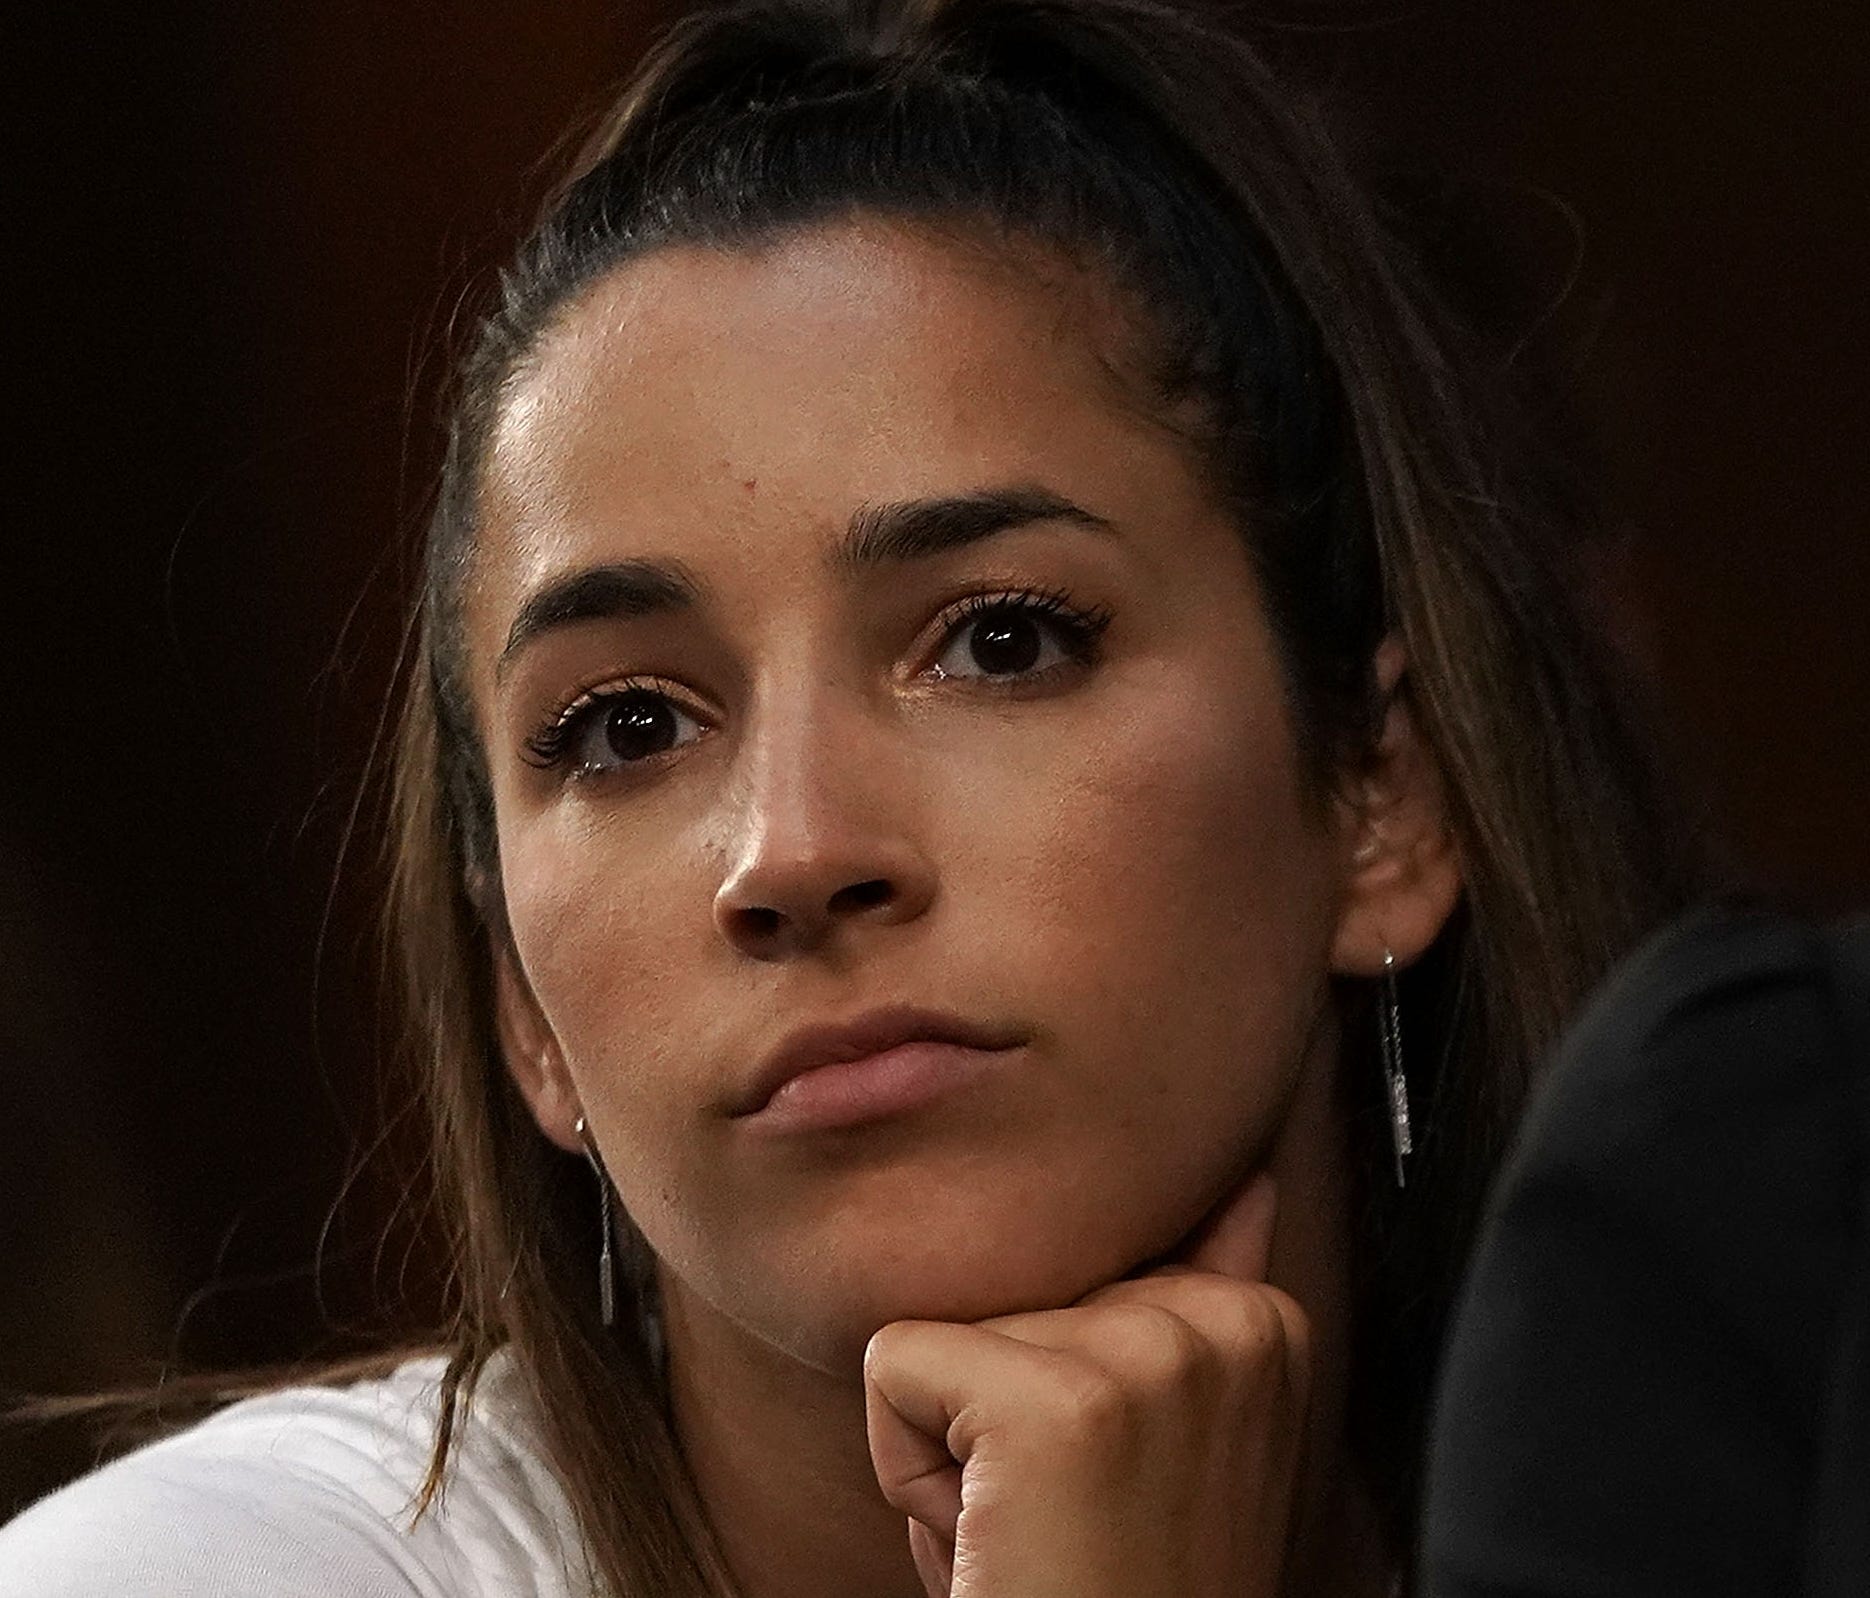 Aly Raisman listens during a Senate hearing to focus on changes made by the U.S. Olympic Committee, USA Gymnastics and Michigan State University to protect Olympic and amateur athletes from abuse.